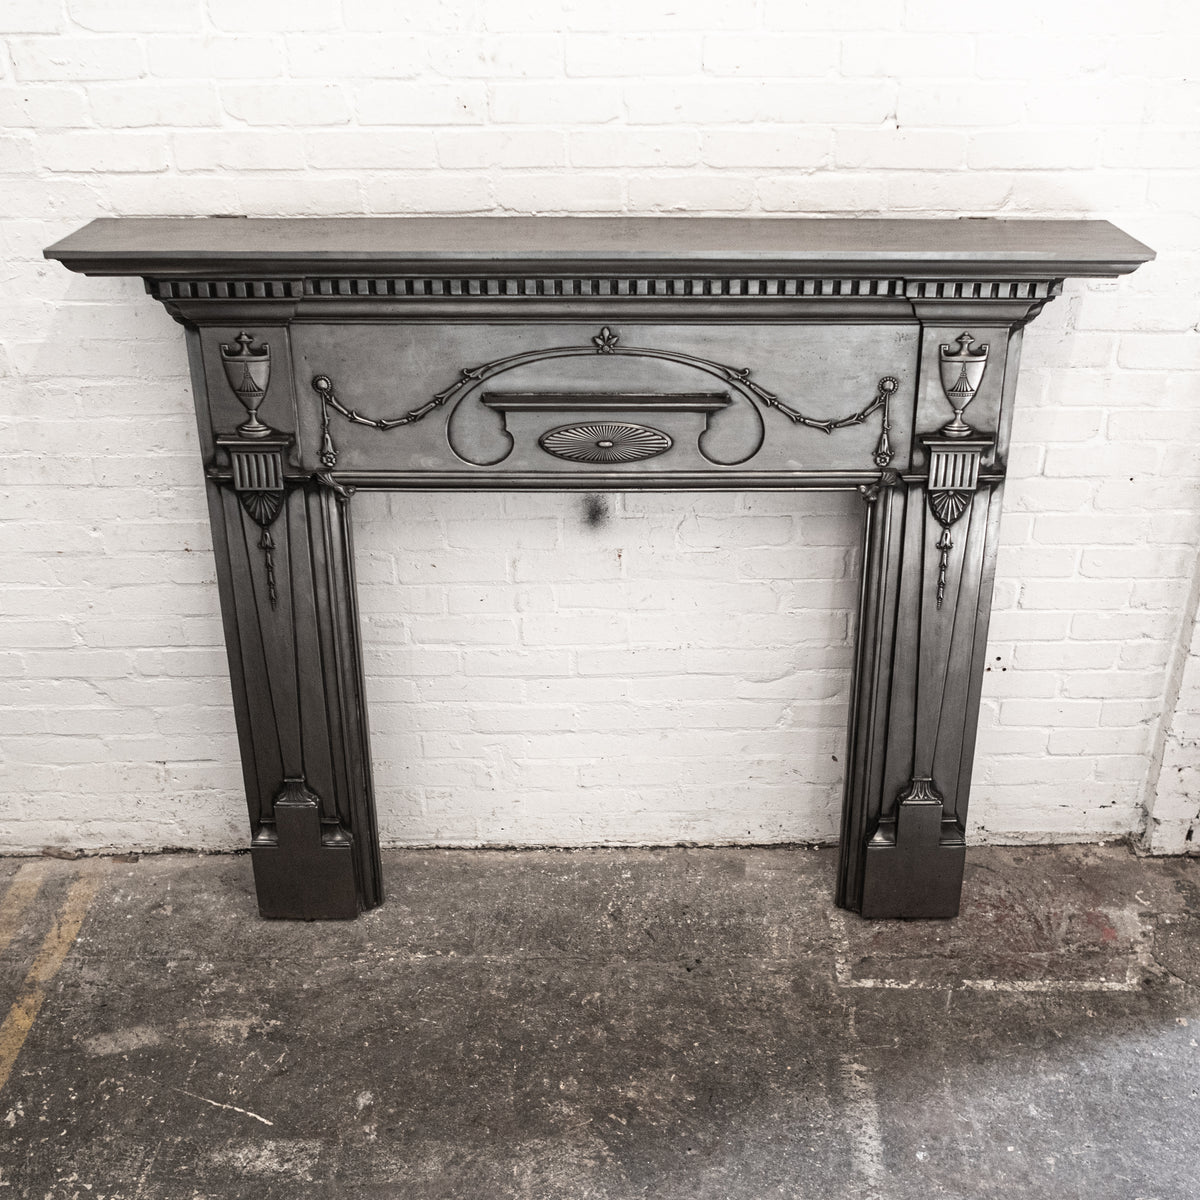 Antique Polished Cast Iron Fireplace Surround | The Architectural Forum